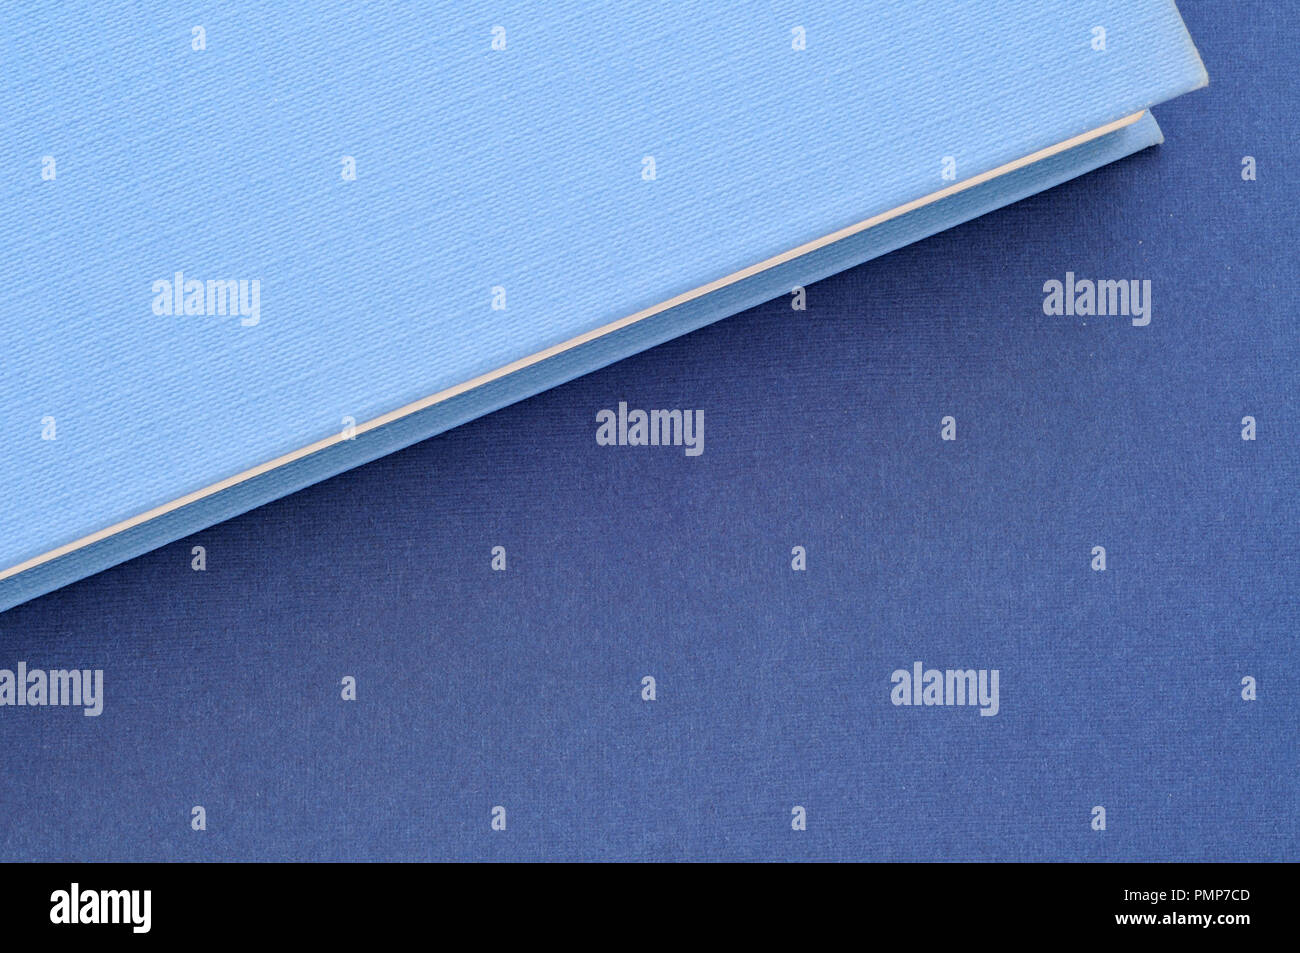 back to school,close up on blue book covers, from above, minimal background Stock Photo